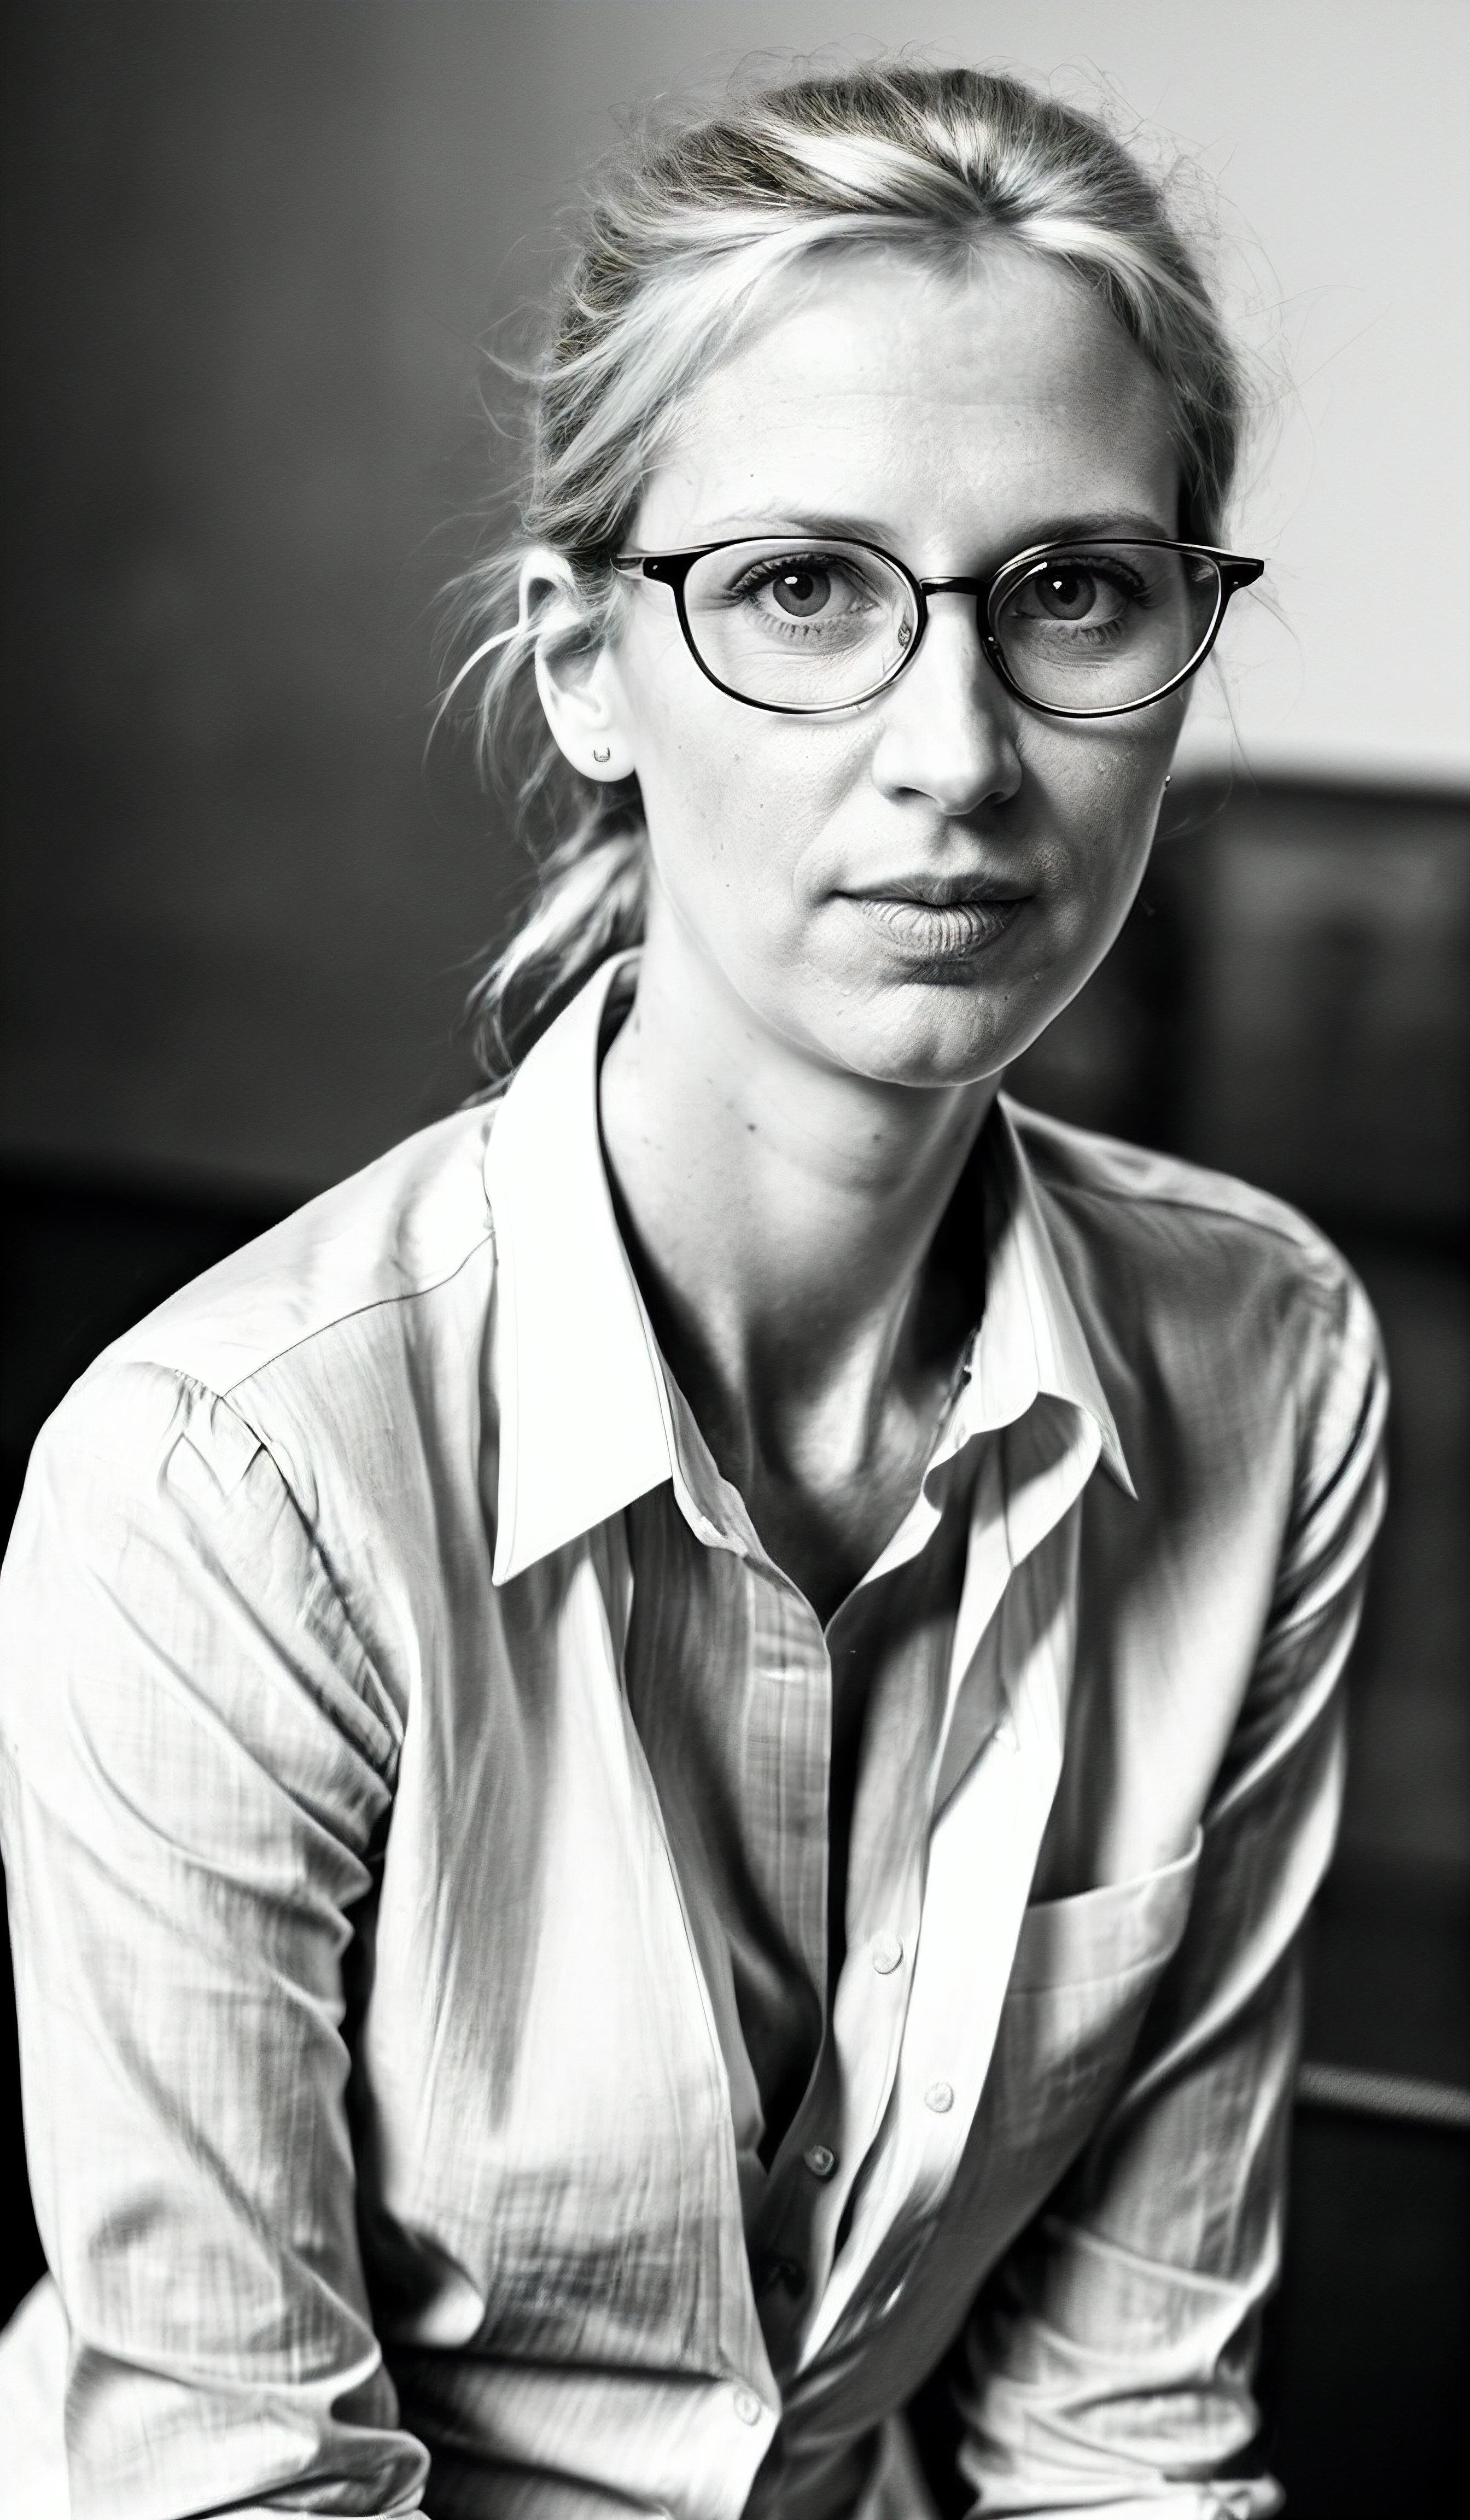 Alice Weidel image by Diogenes84